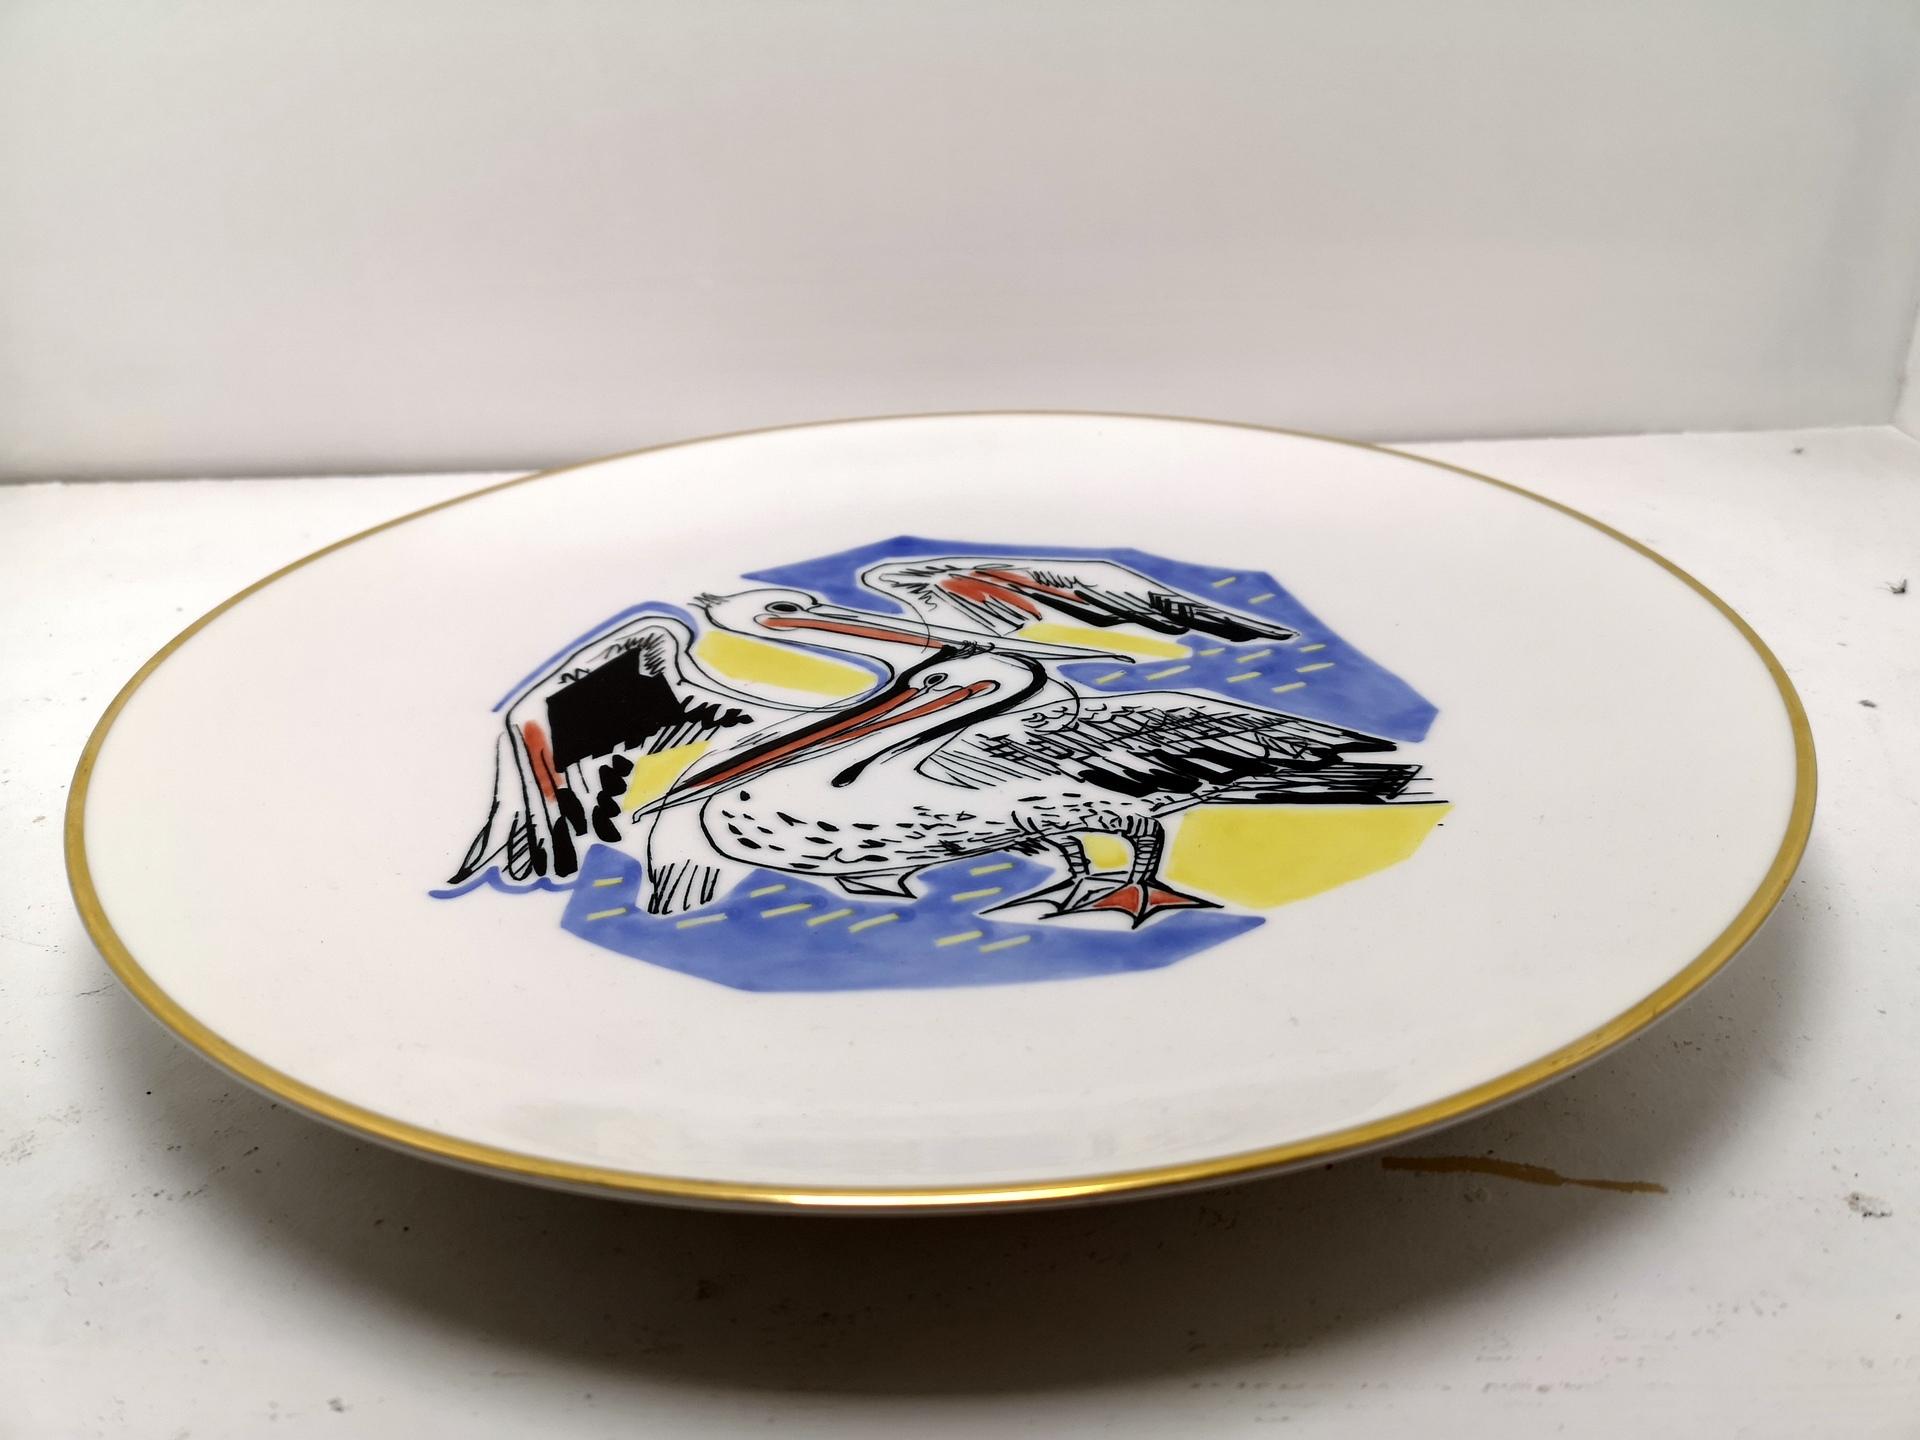 Hand-Painted Rosenthal Hand Painted Plate with Two Cranes, 1960s For Sale